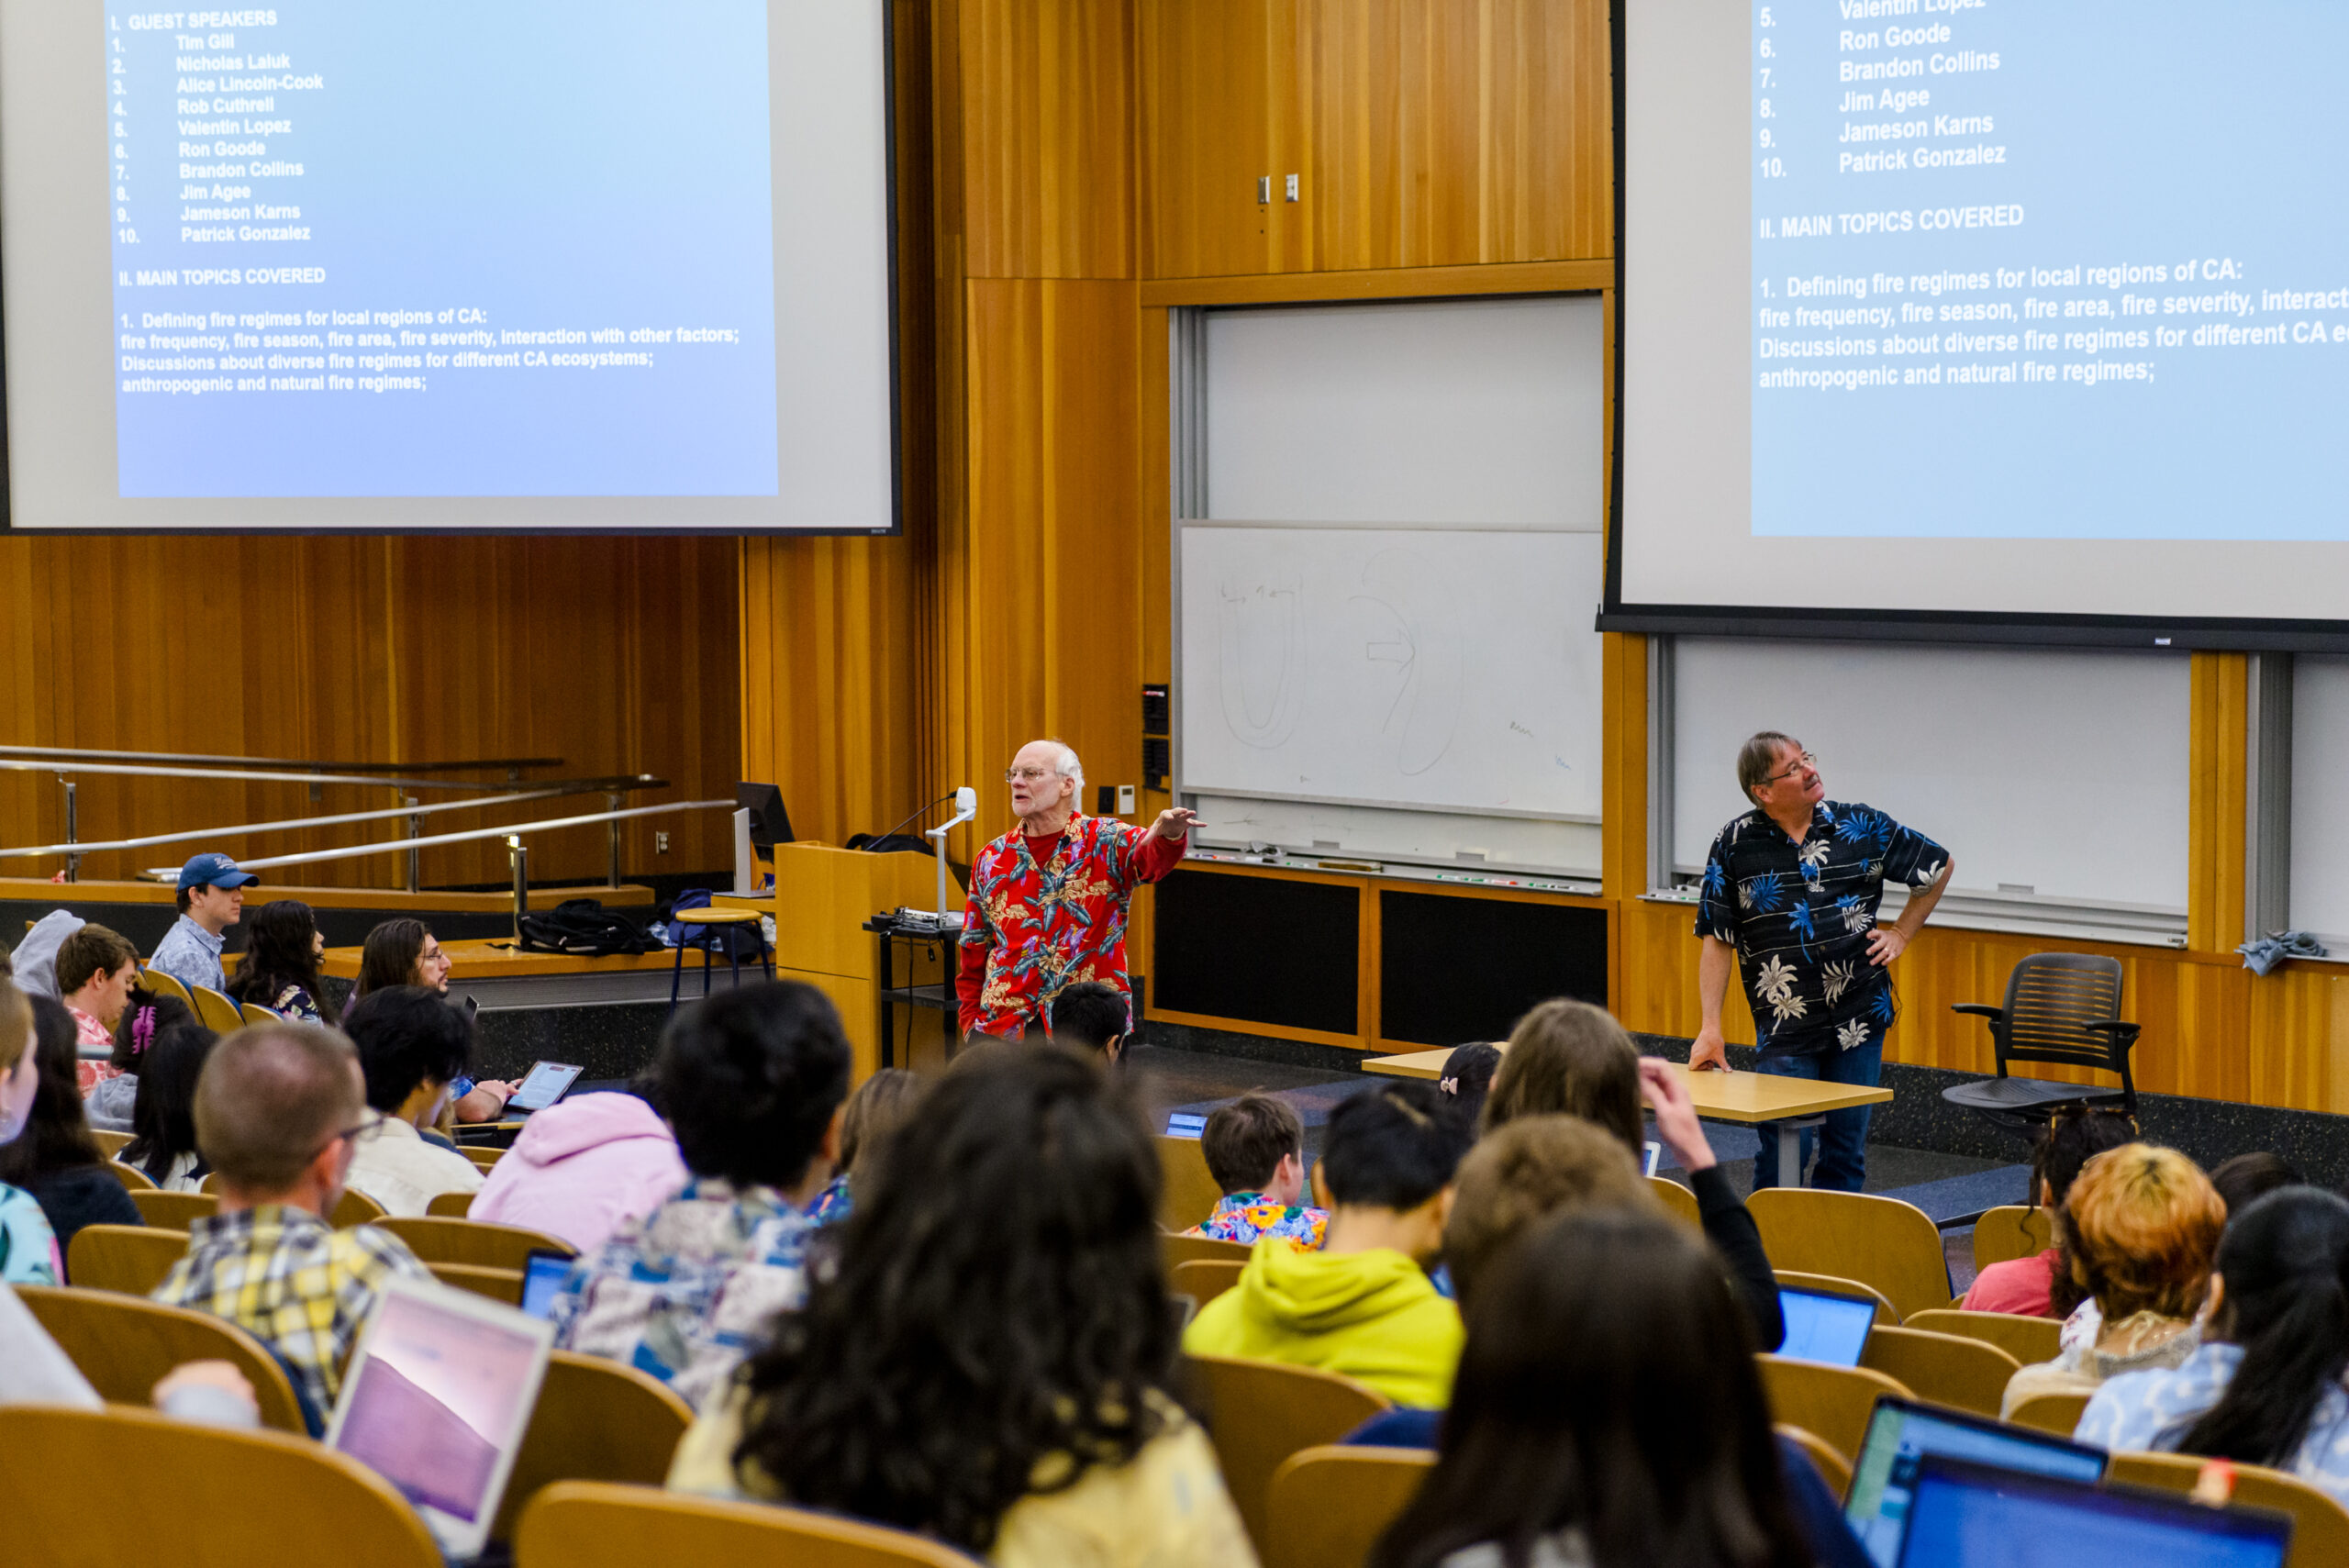 Professors Kent Lightfoot and Scott Stephens teaching in a lecture hall